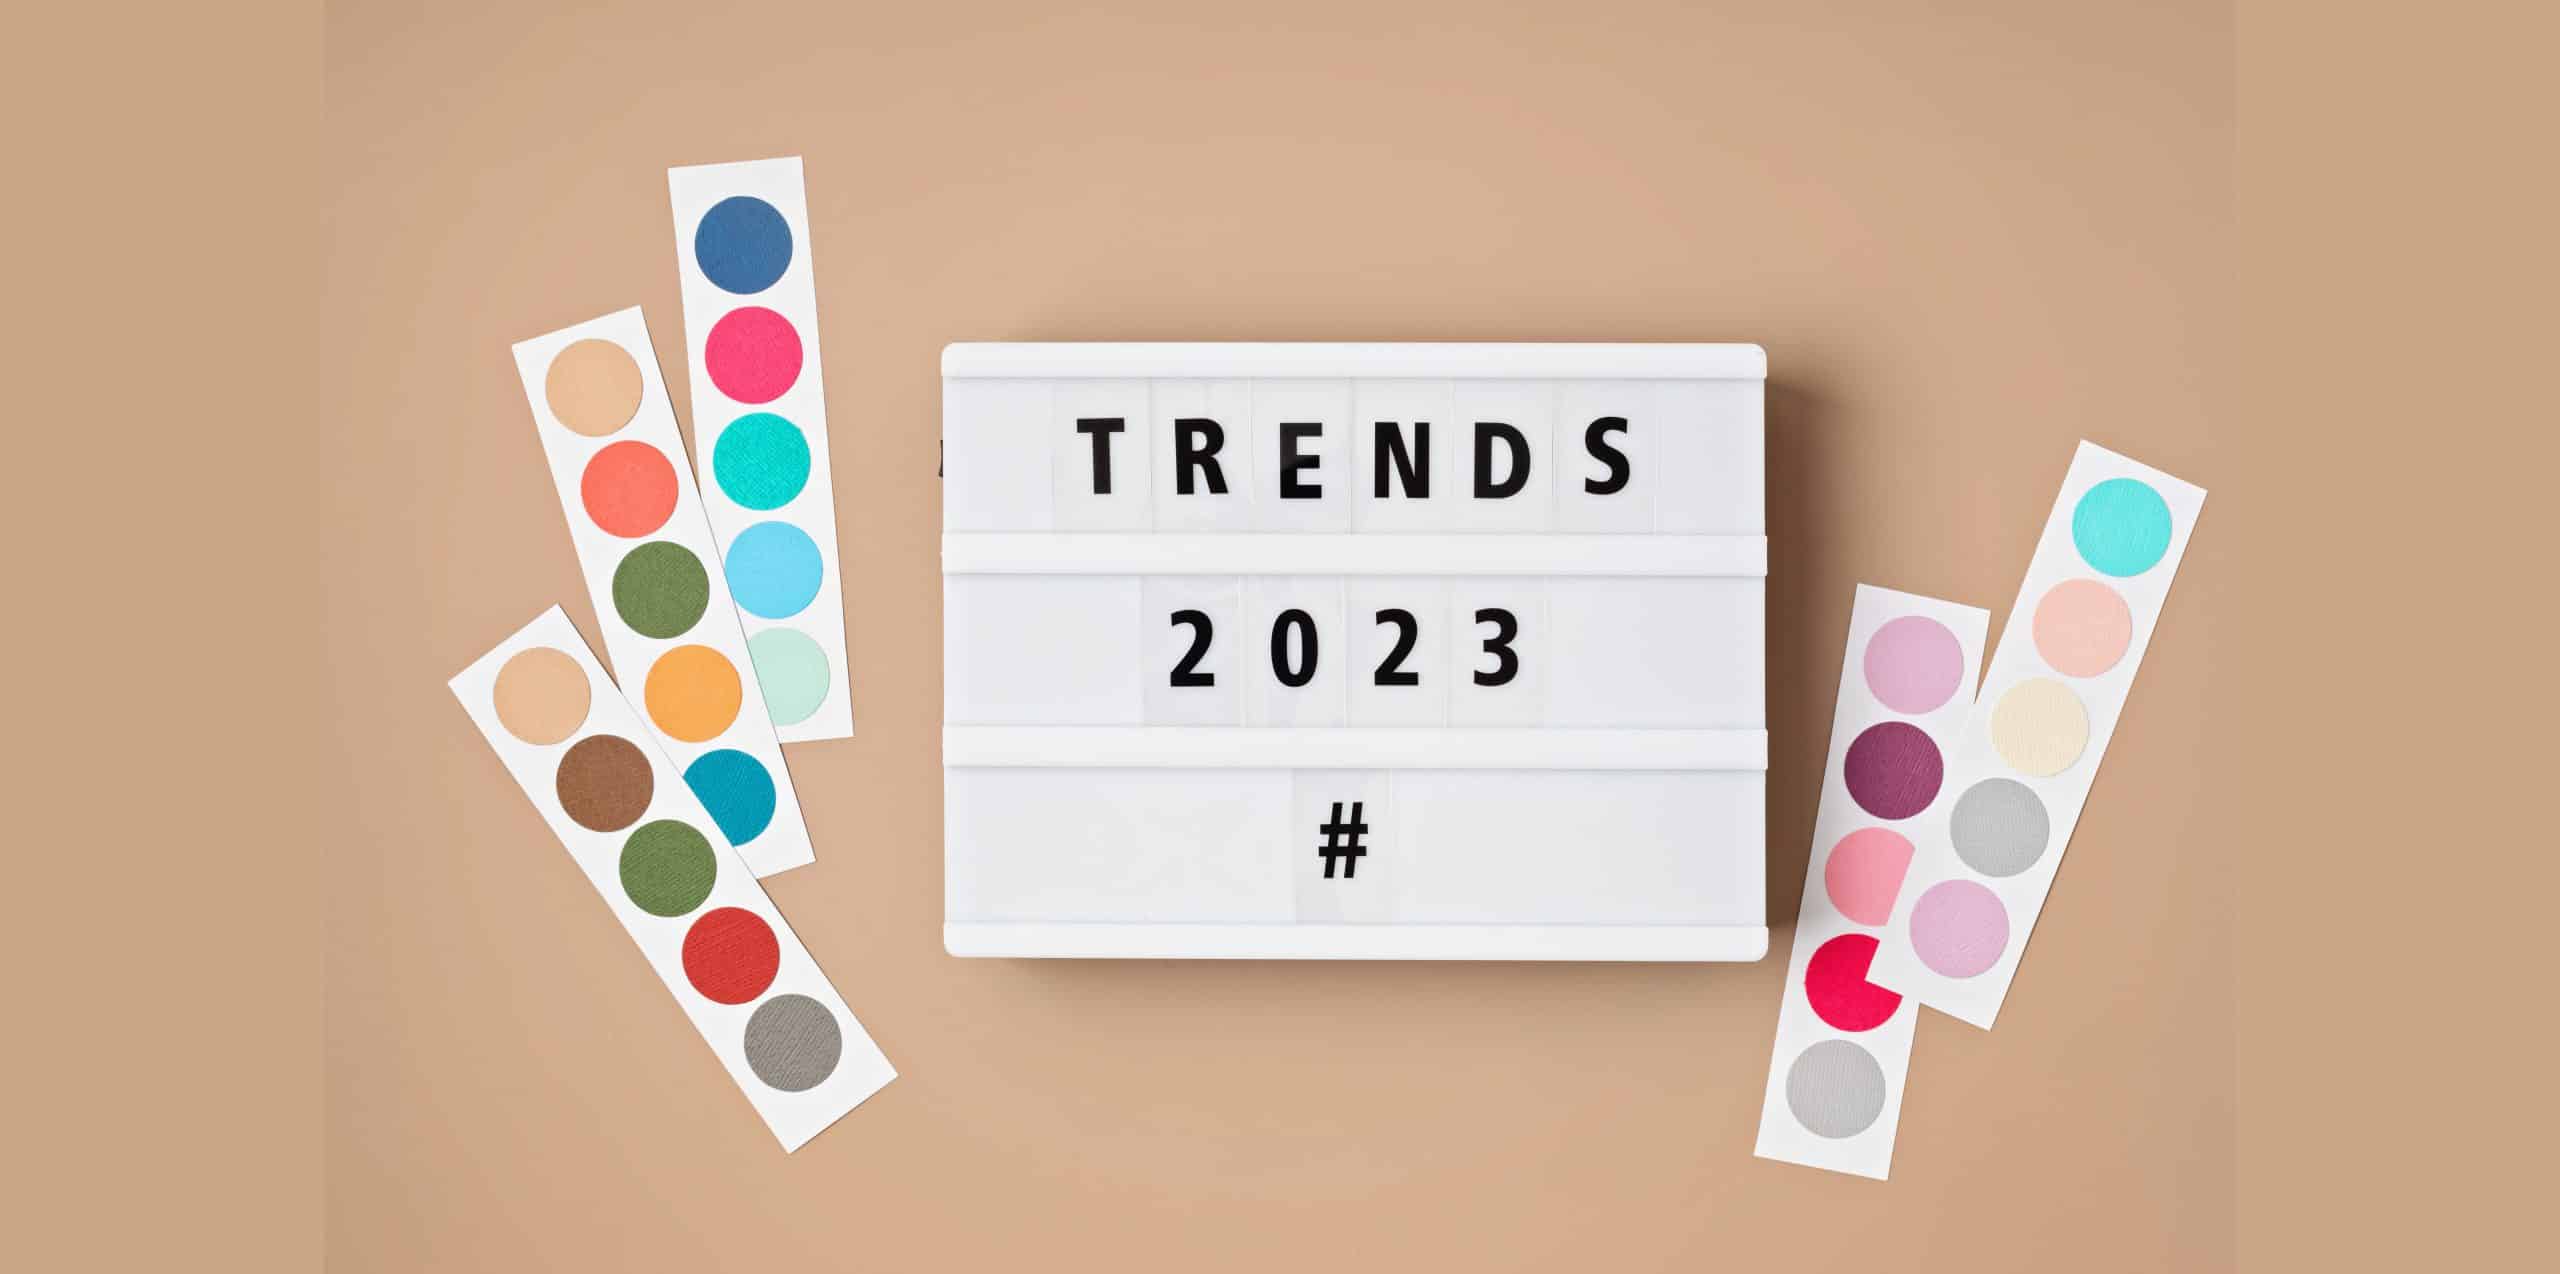 social media marketing trends to watch out for in 2023